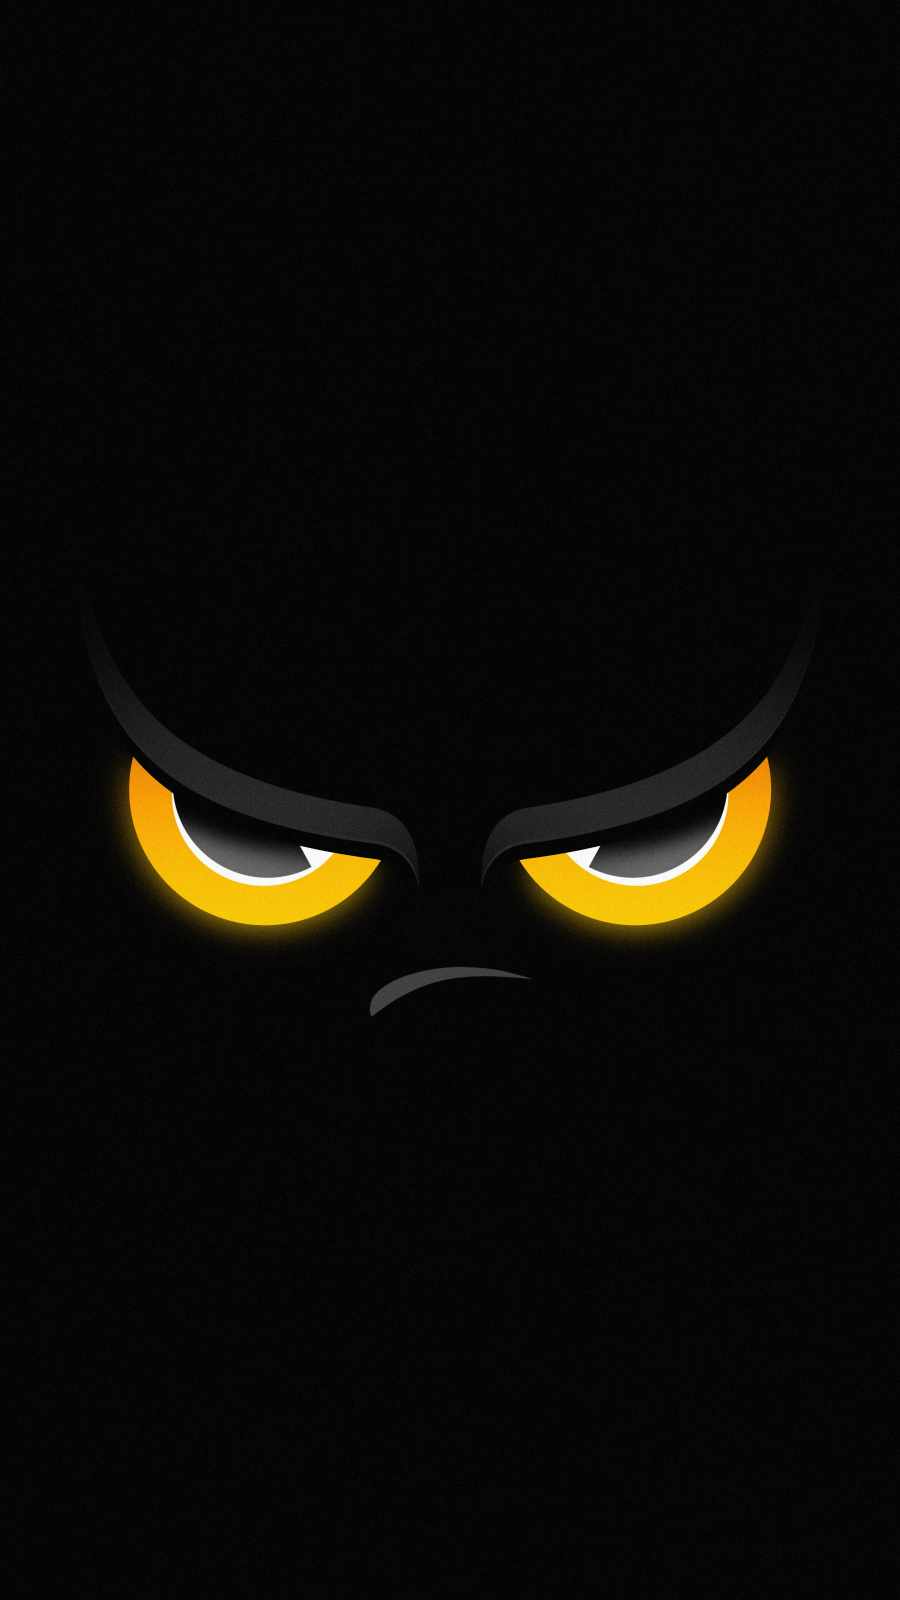 Angry Face IPhone Wallpaper HD  IPhone Wallpapers